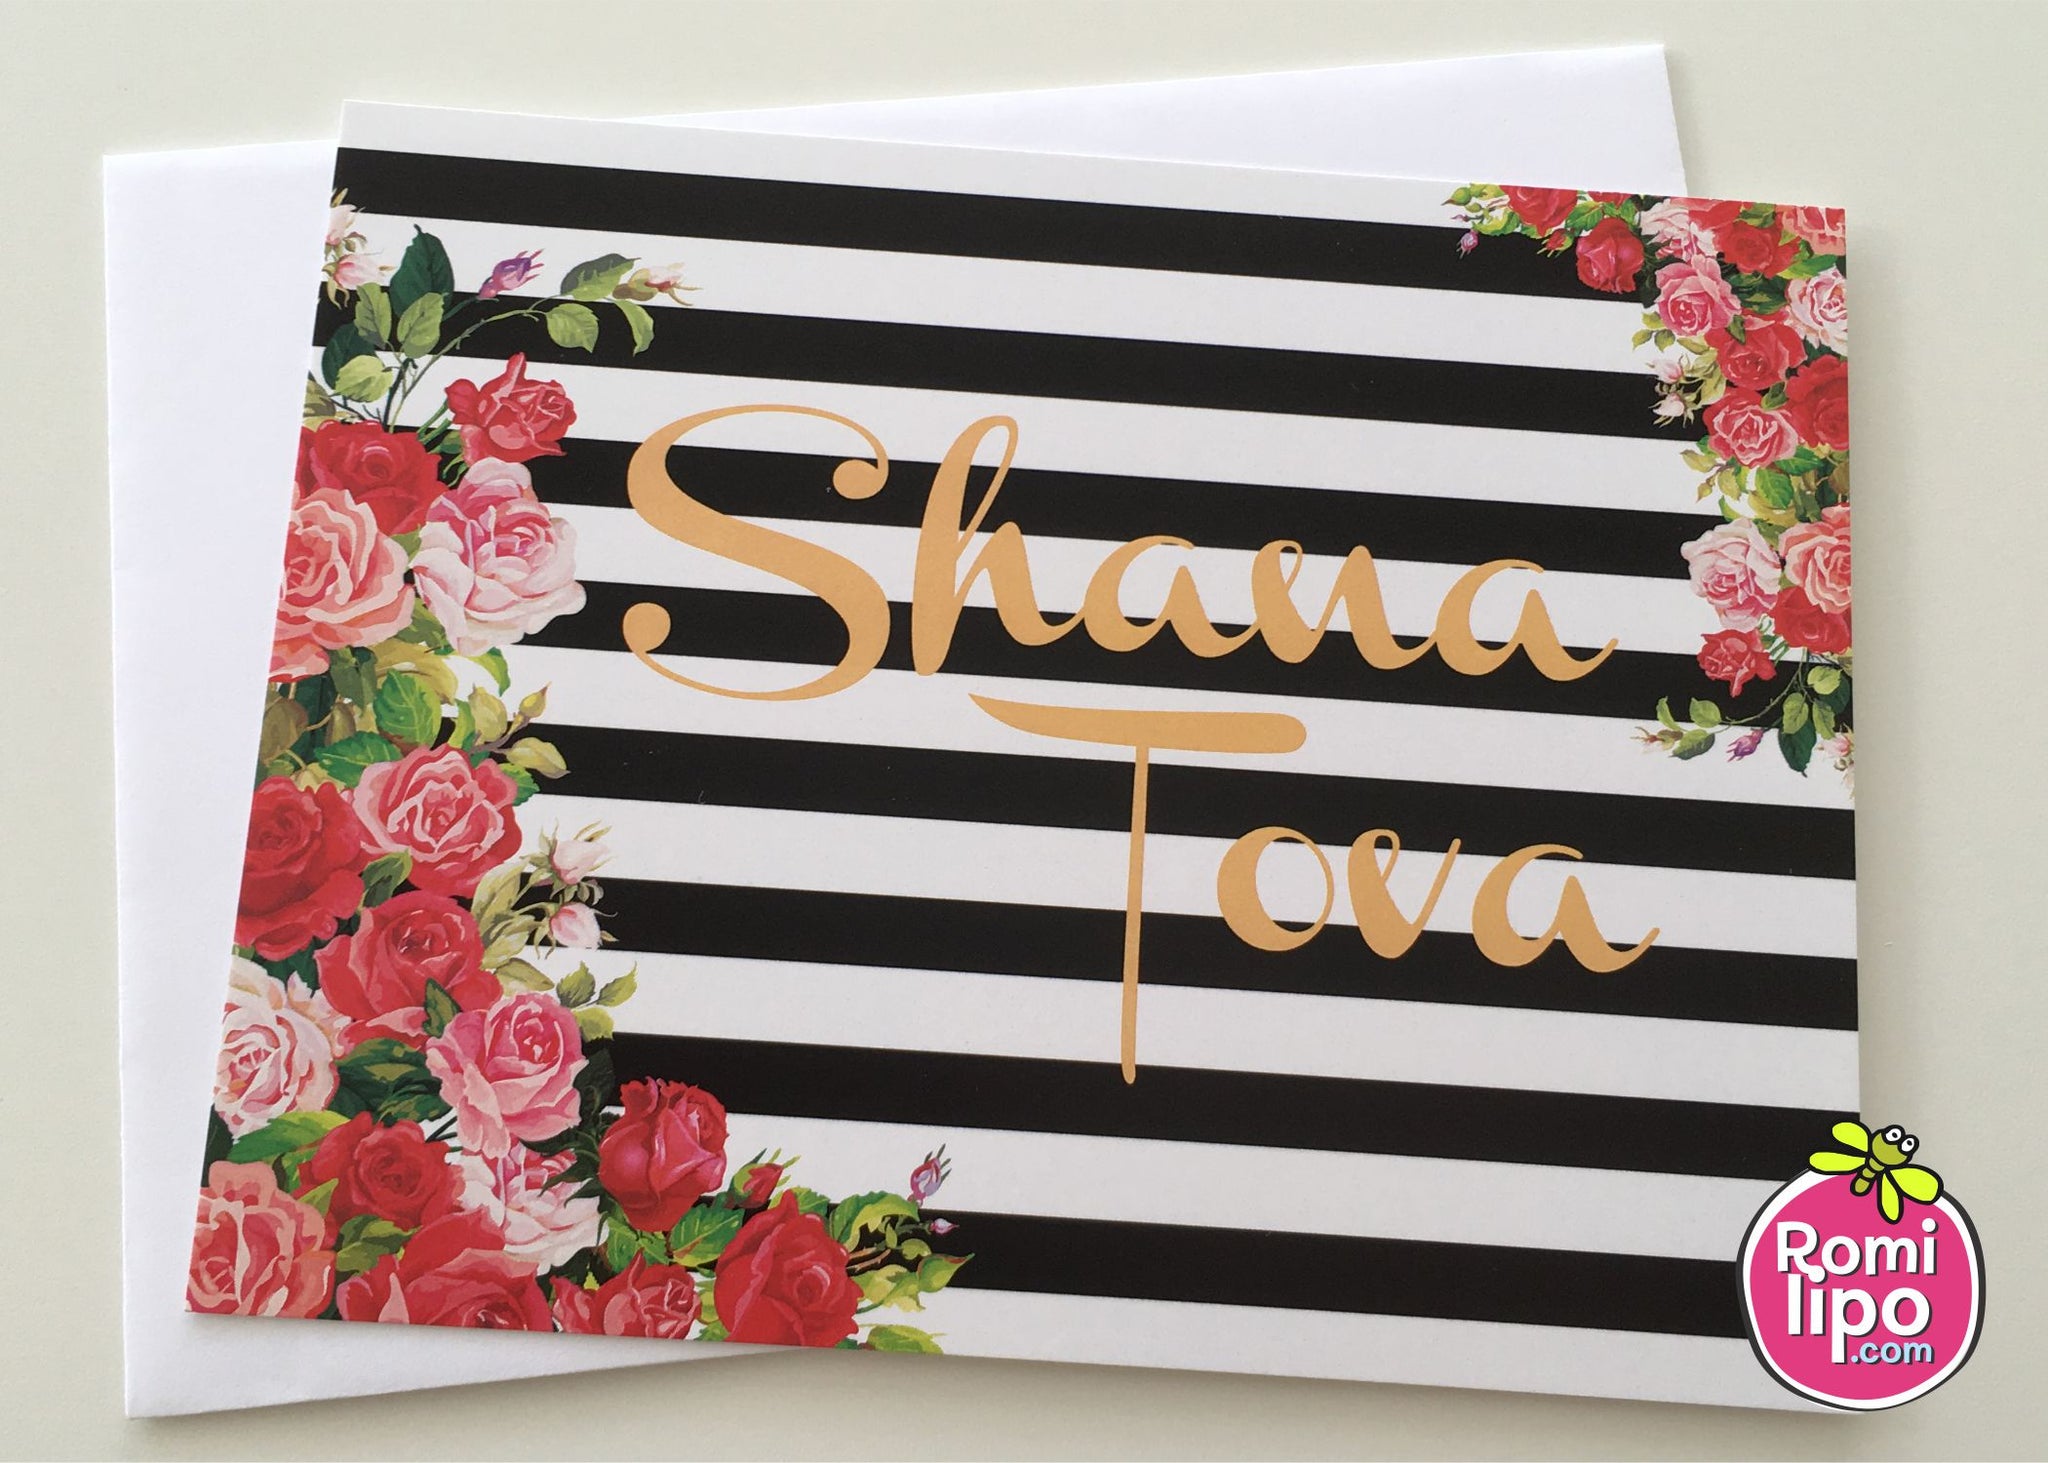 Rosh Hashanah set of 10 note cards with envelopes, Shana Tova note cards, floral with black lines I